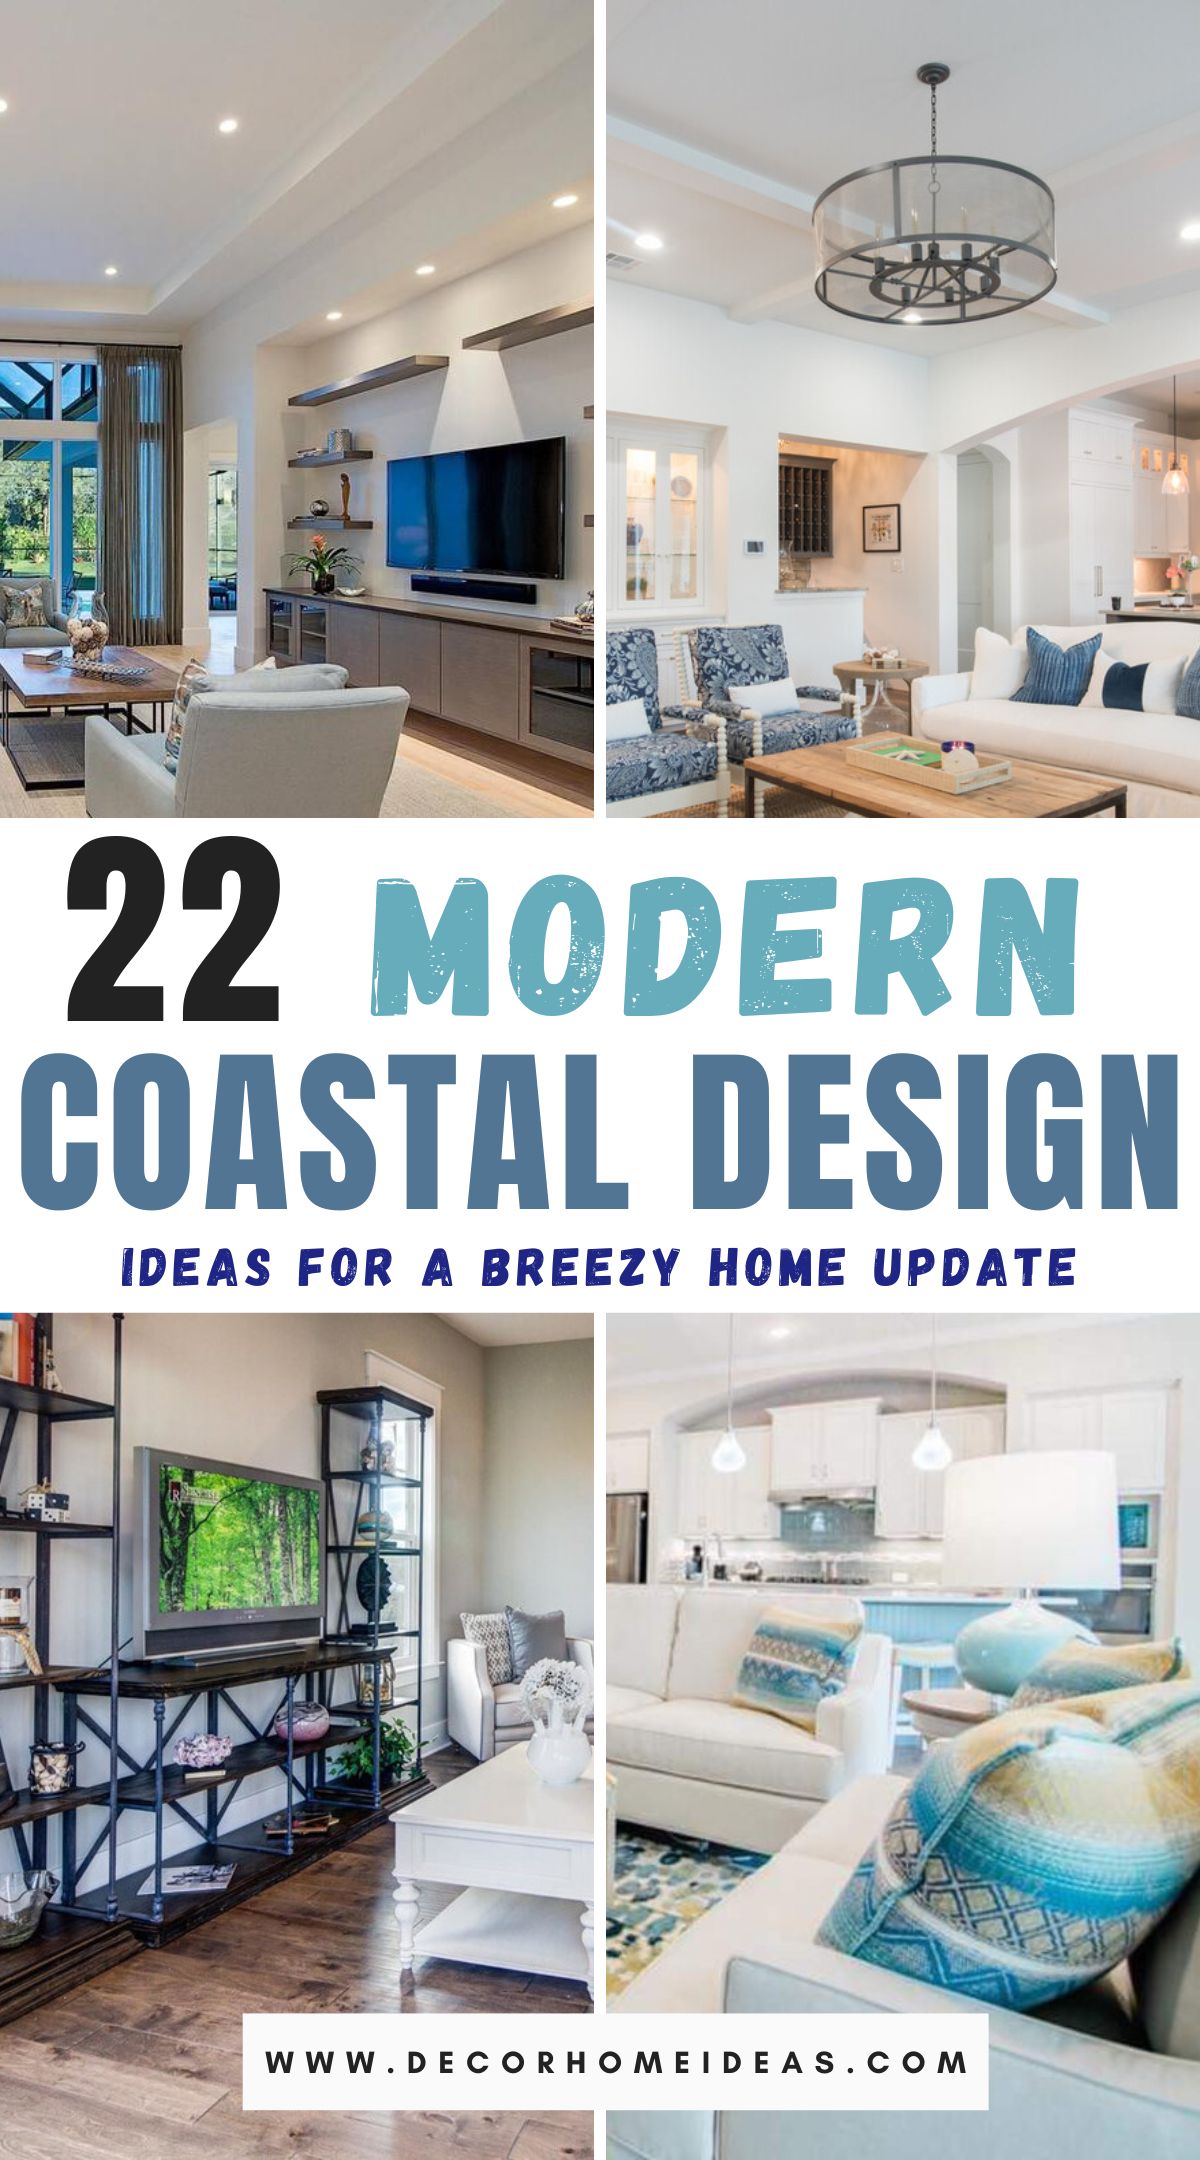 Transform your space with these 22 fresh and inspiring ideas for modern coastal interior design. From serene color palettes to natural textures, explore innovative ways to evoke the beauty and tranquility of coastal living in your home.